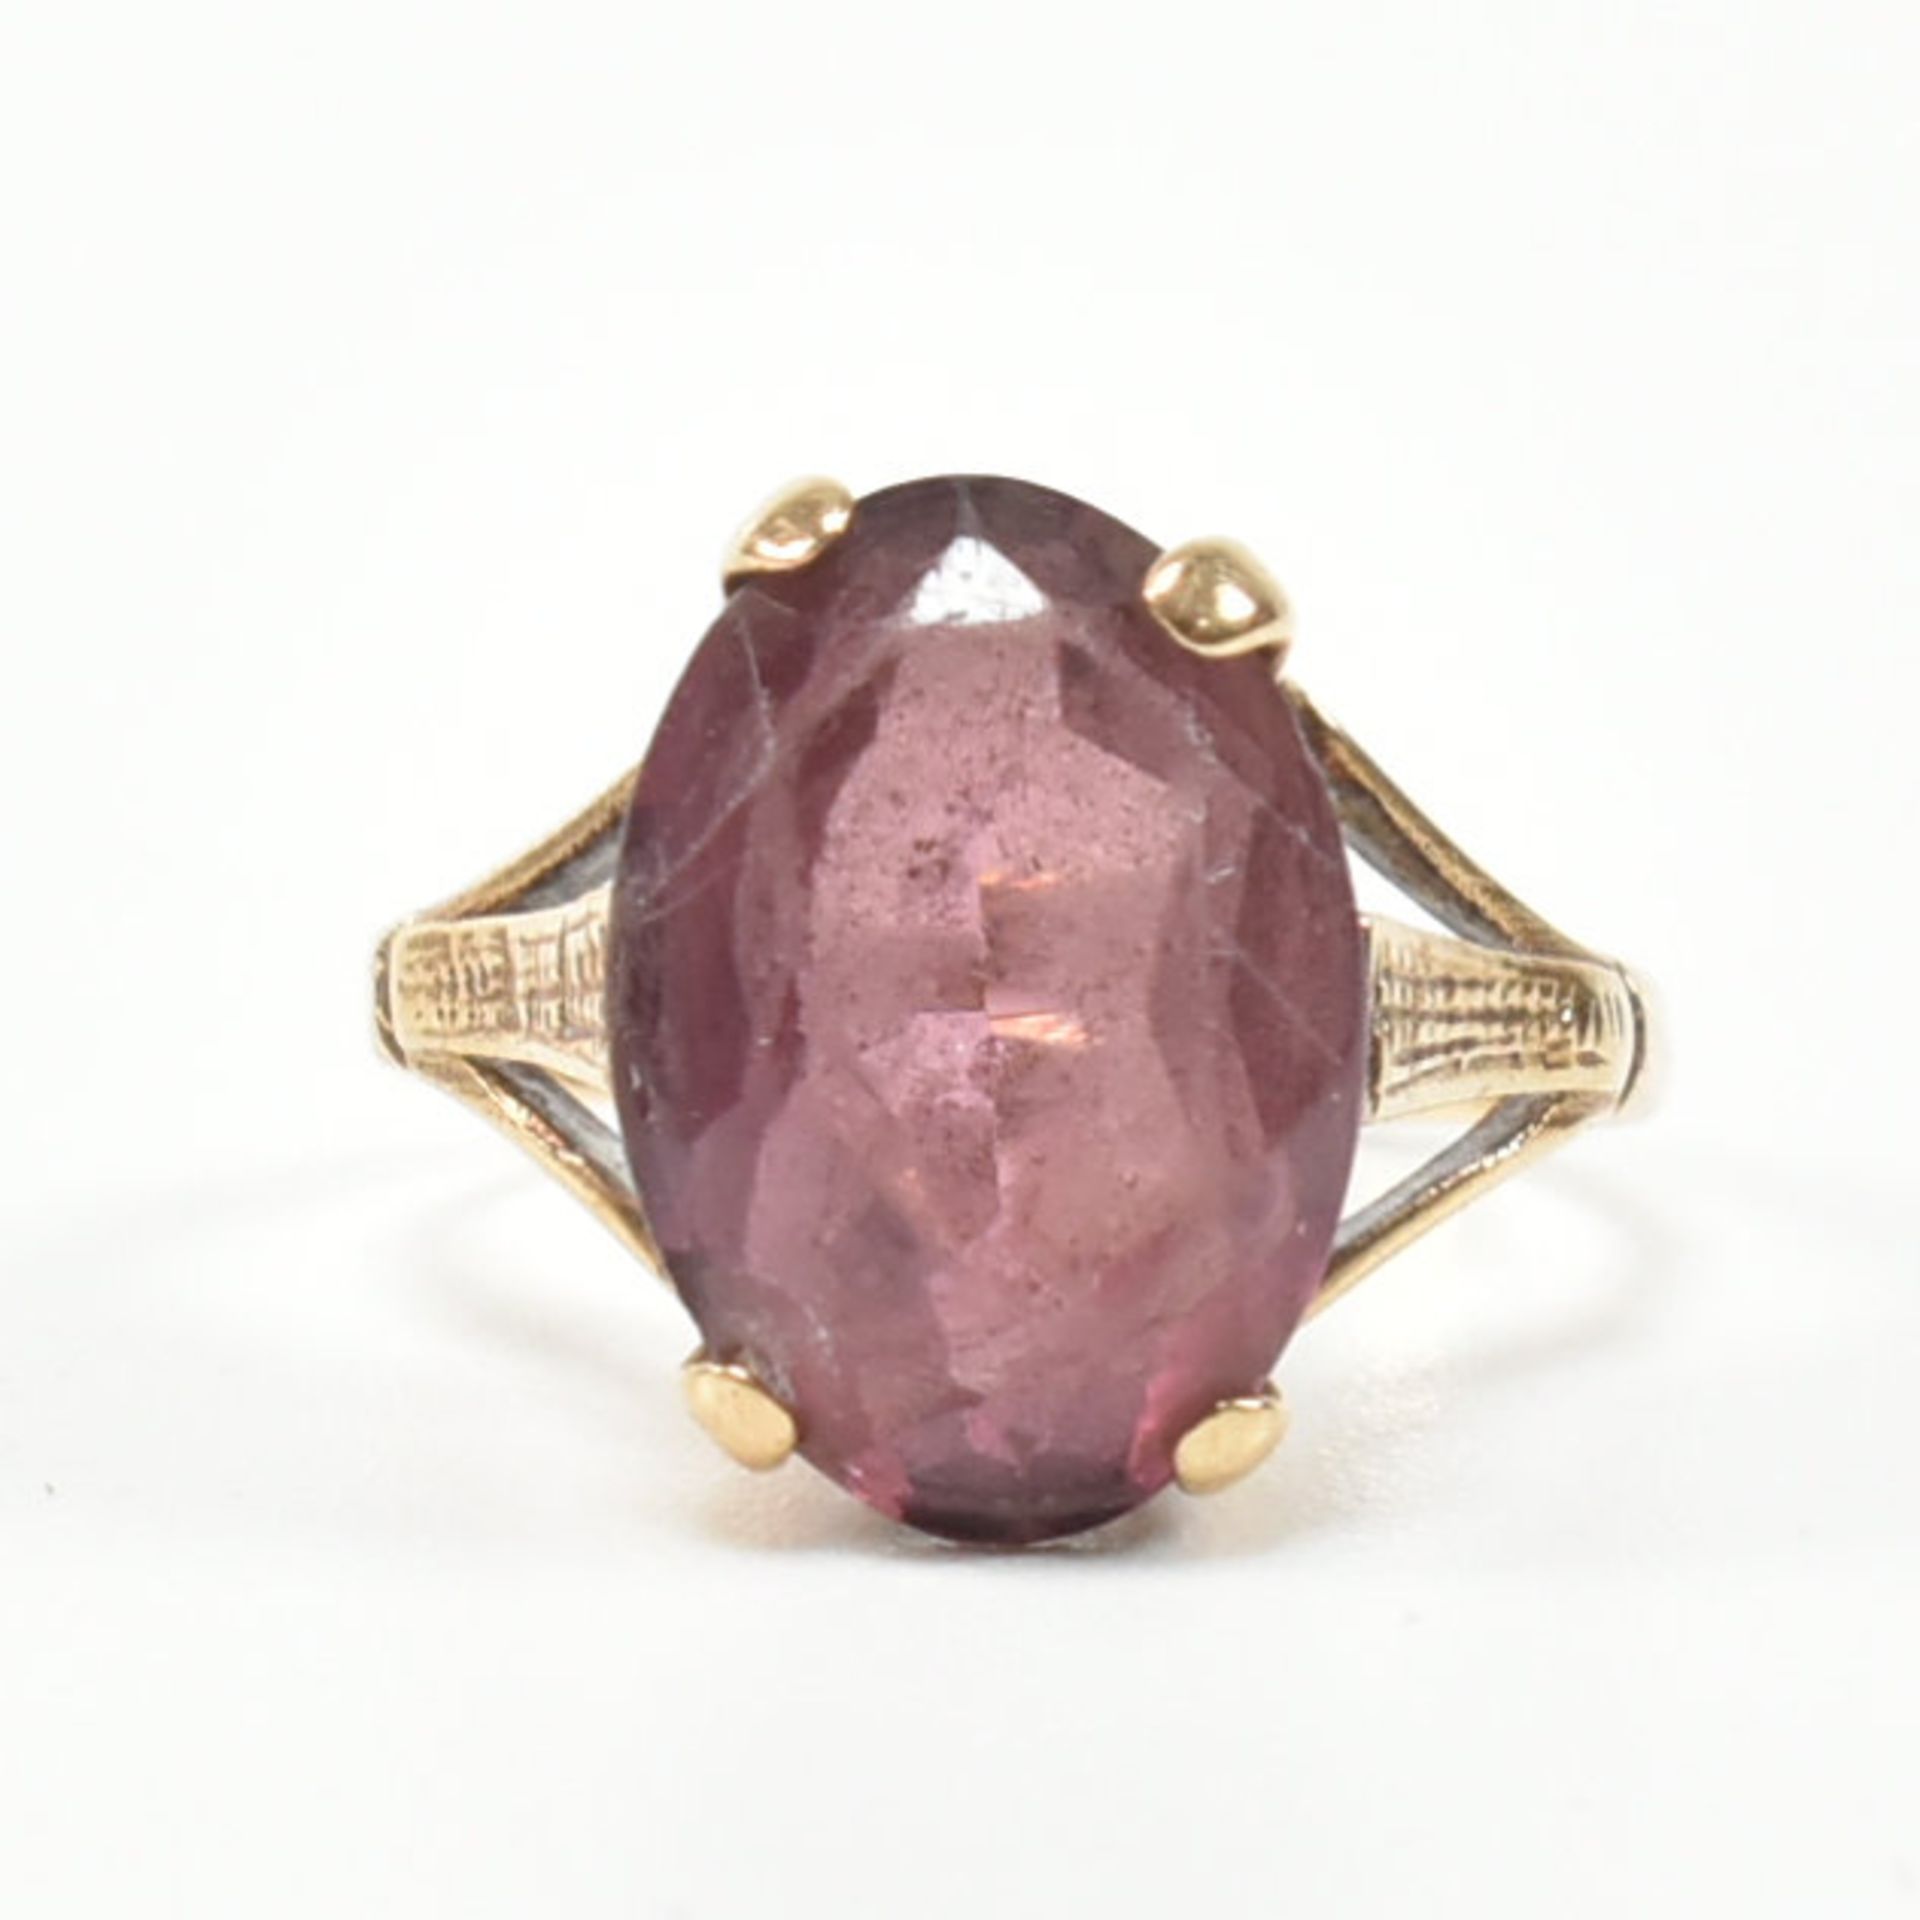 VINTAGE 9CT GOLD & PURPLE STONE RING - Image 2 of 9